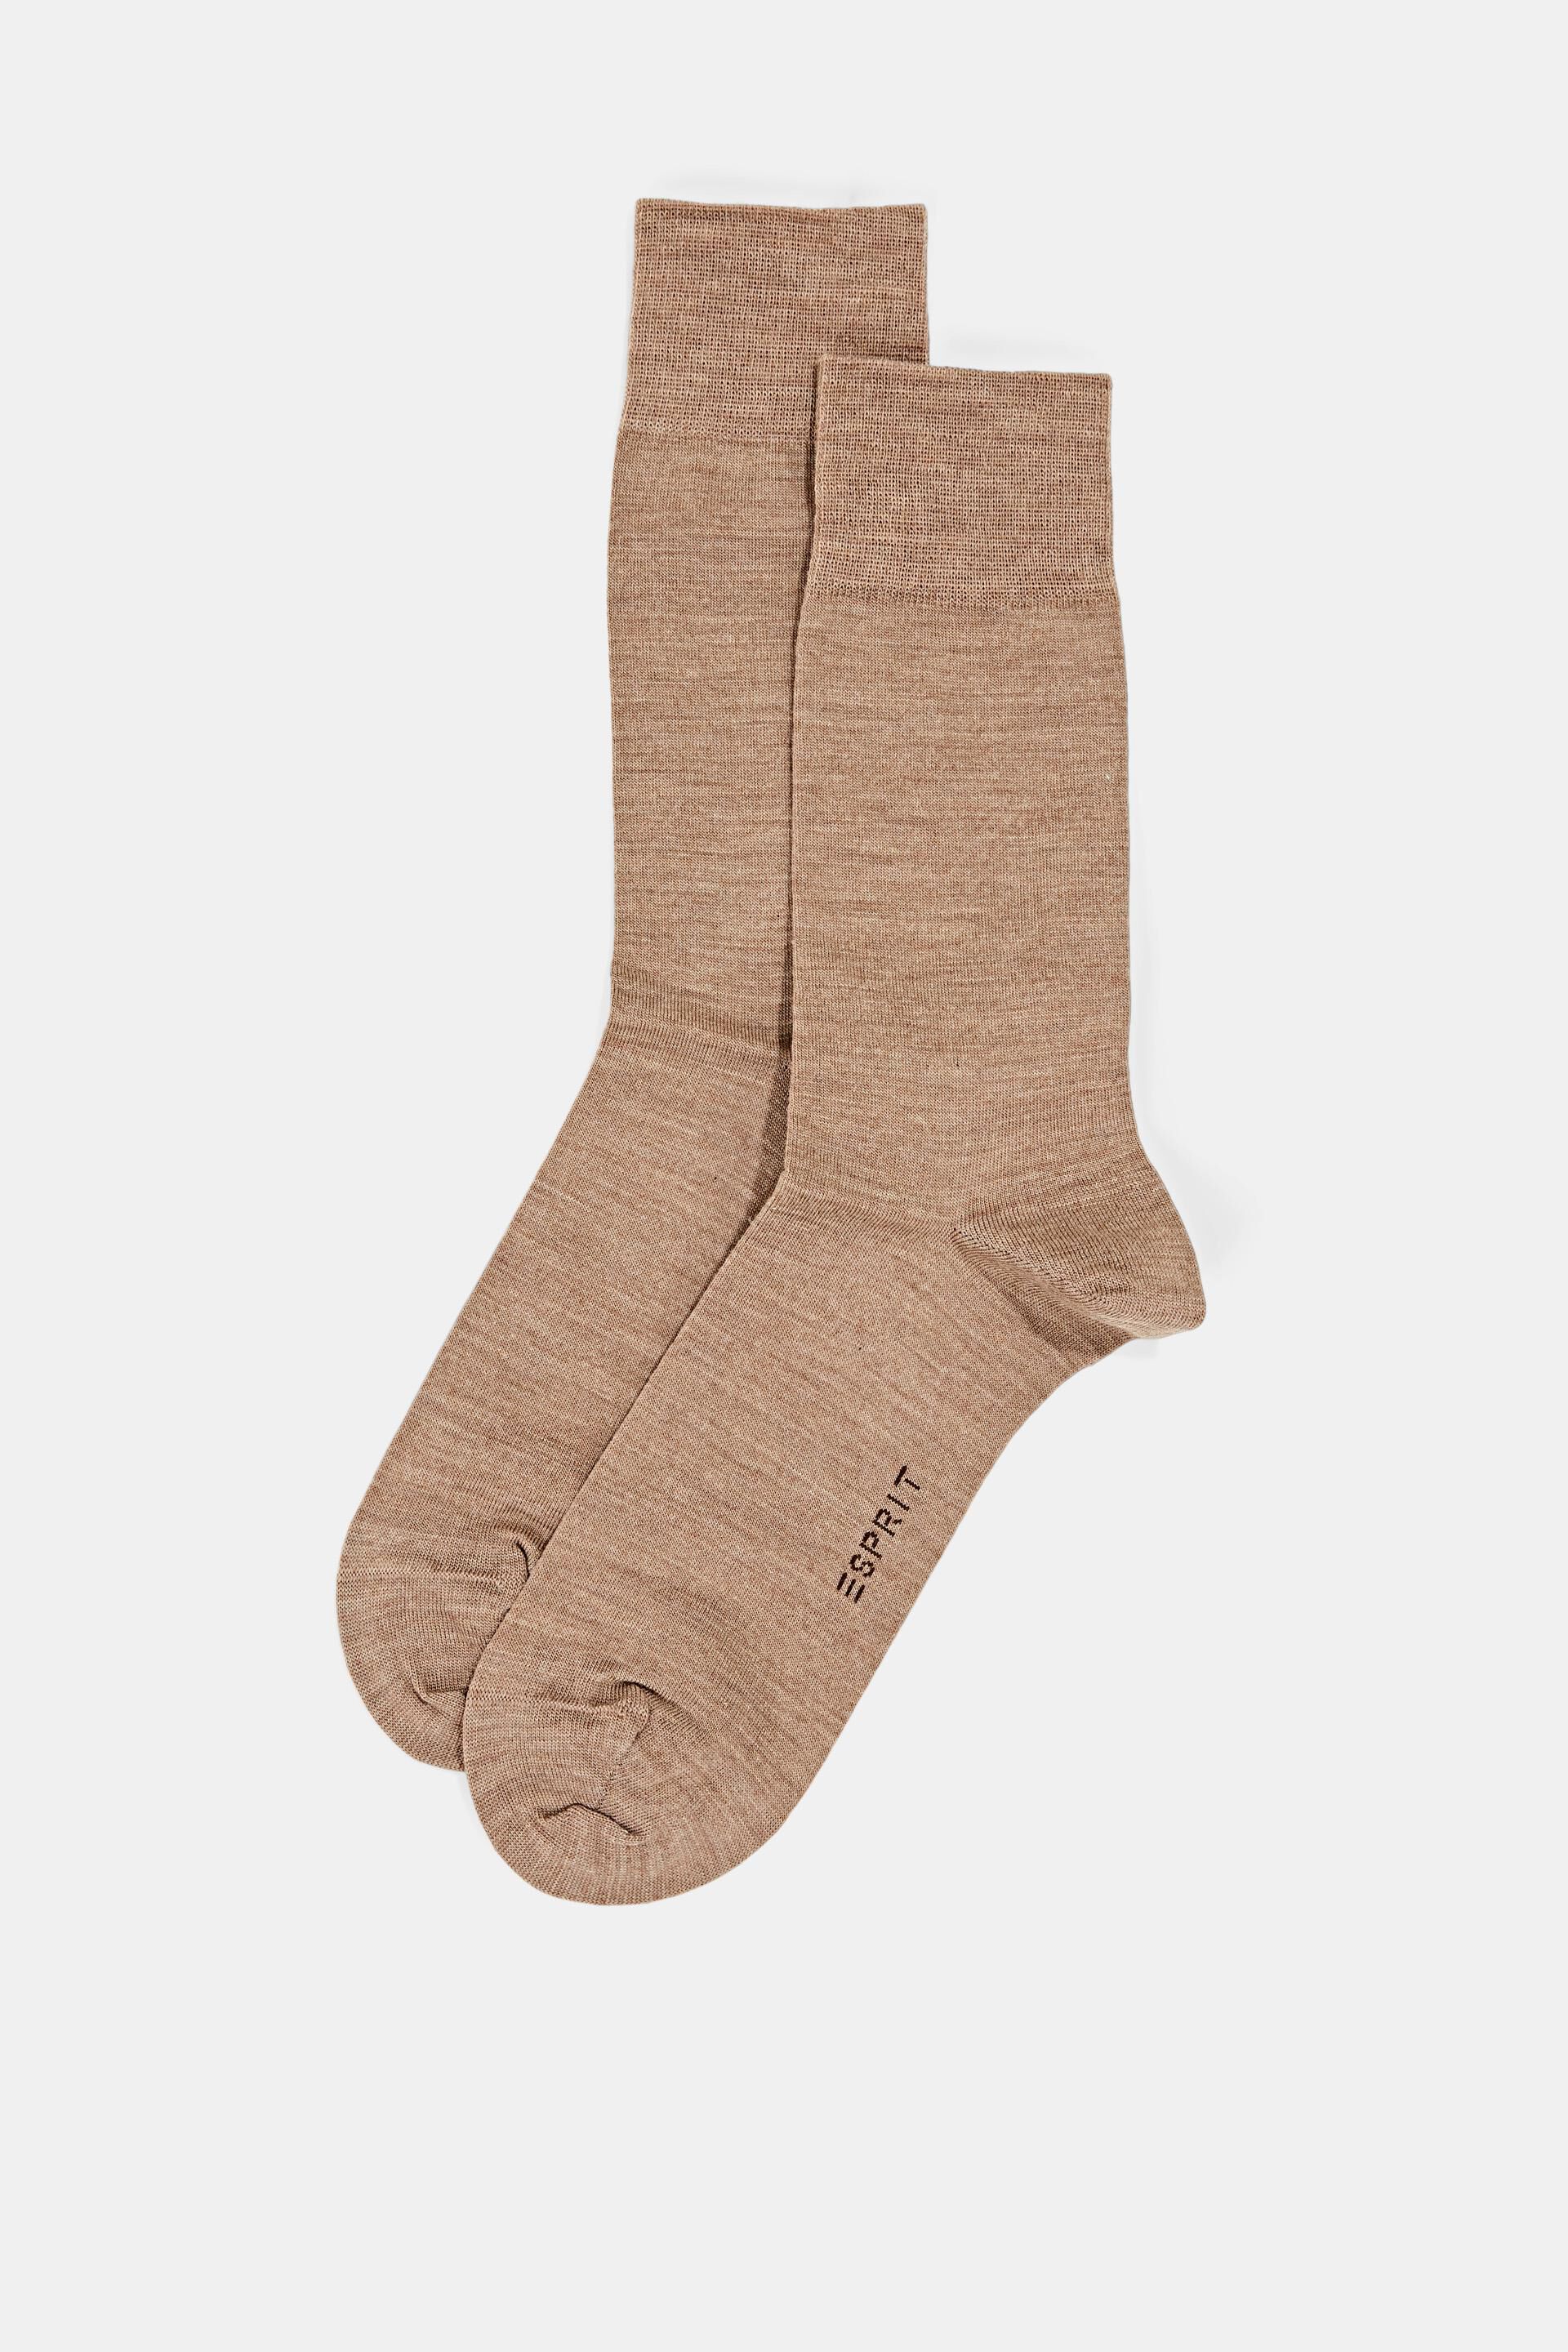 Esprit wool new with knit pack socks fine of Double